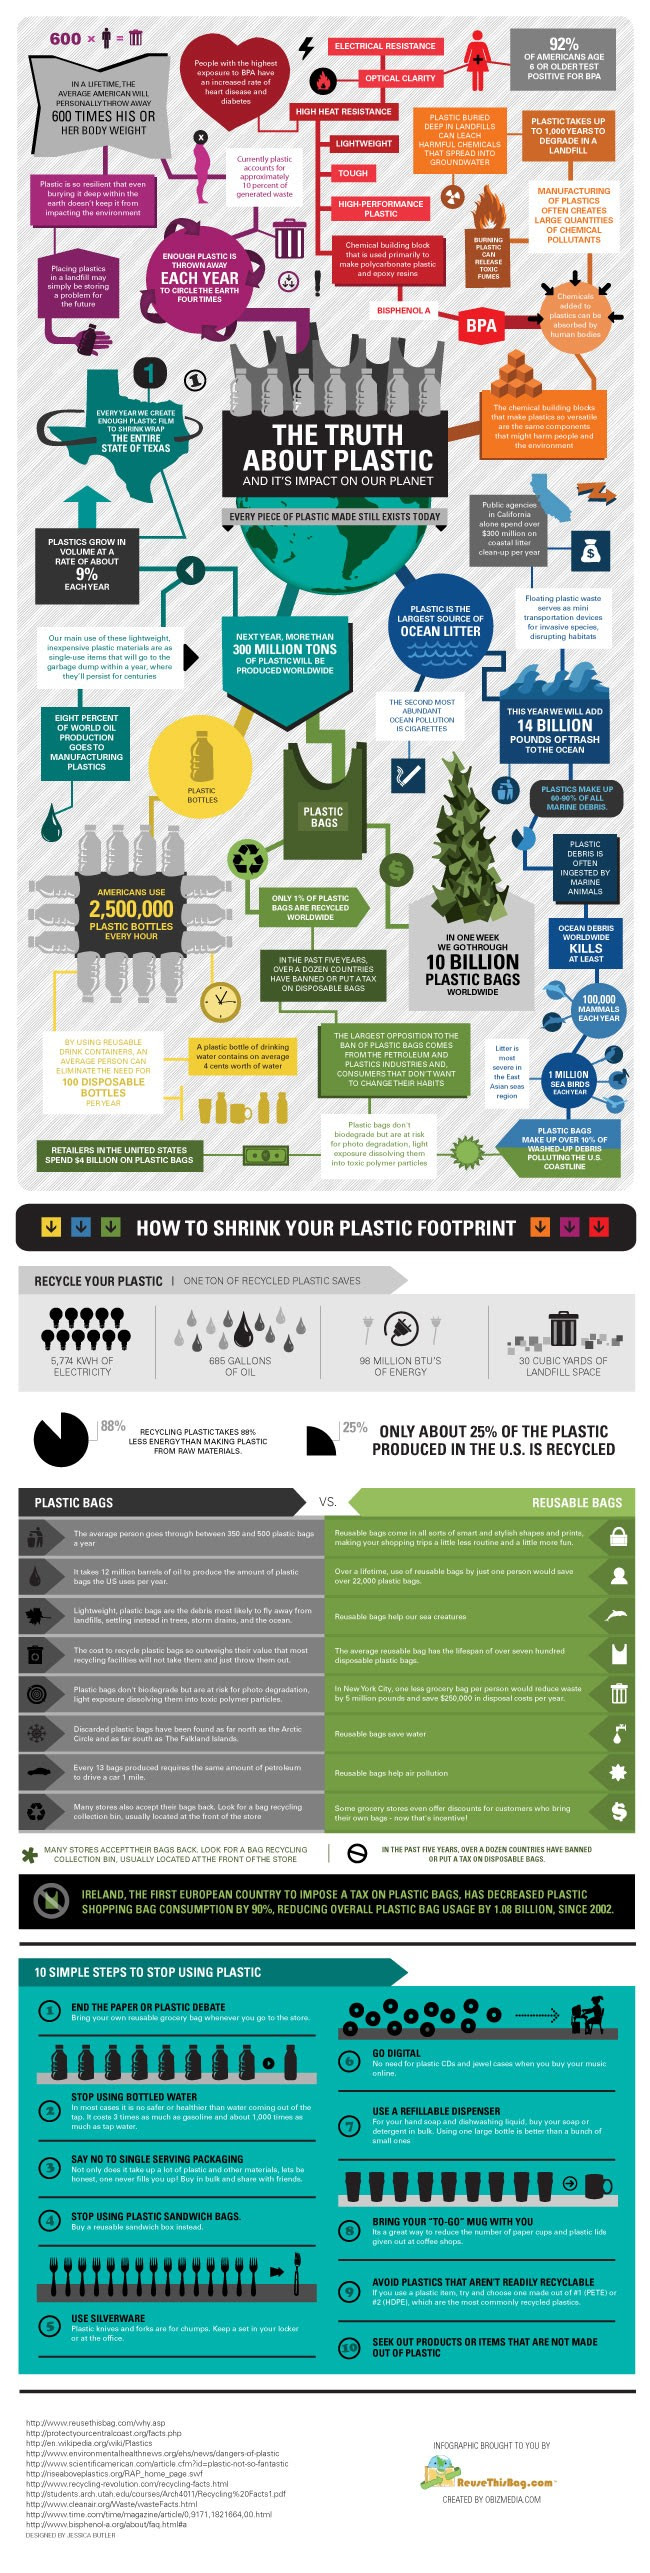 The Truth About Plastic infographic